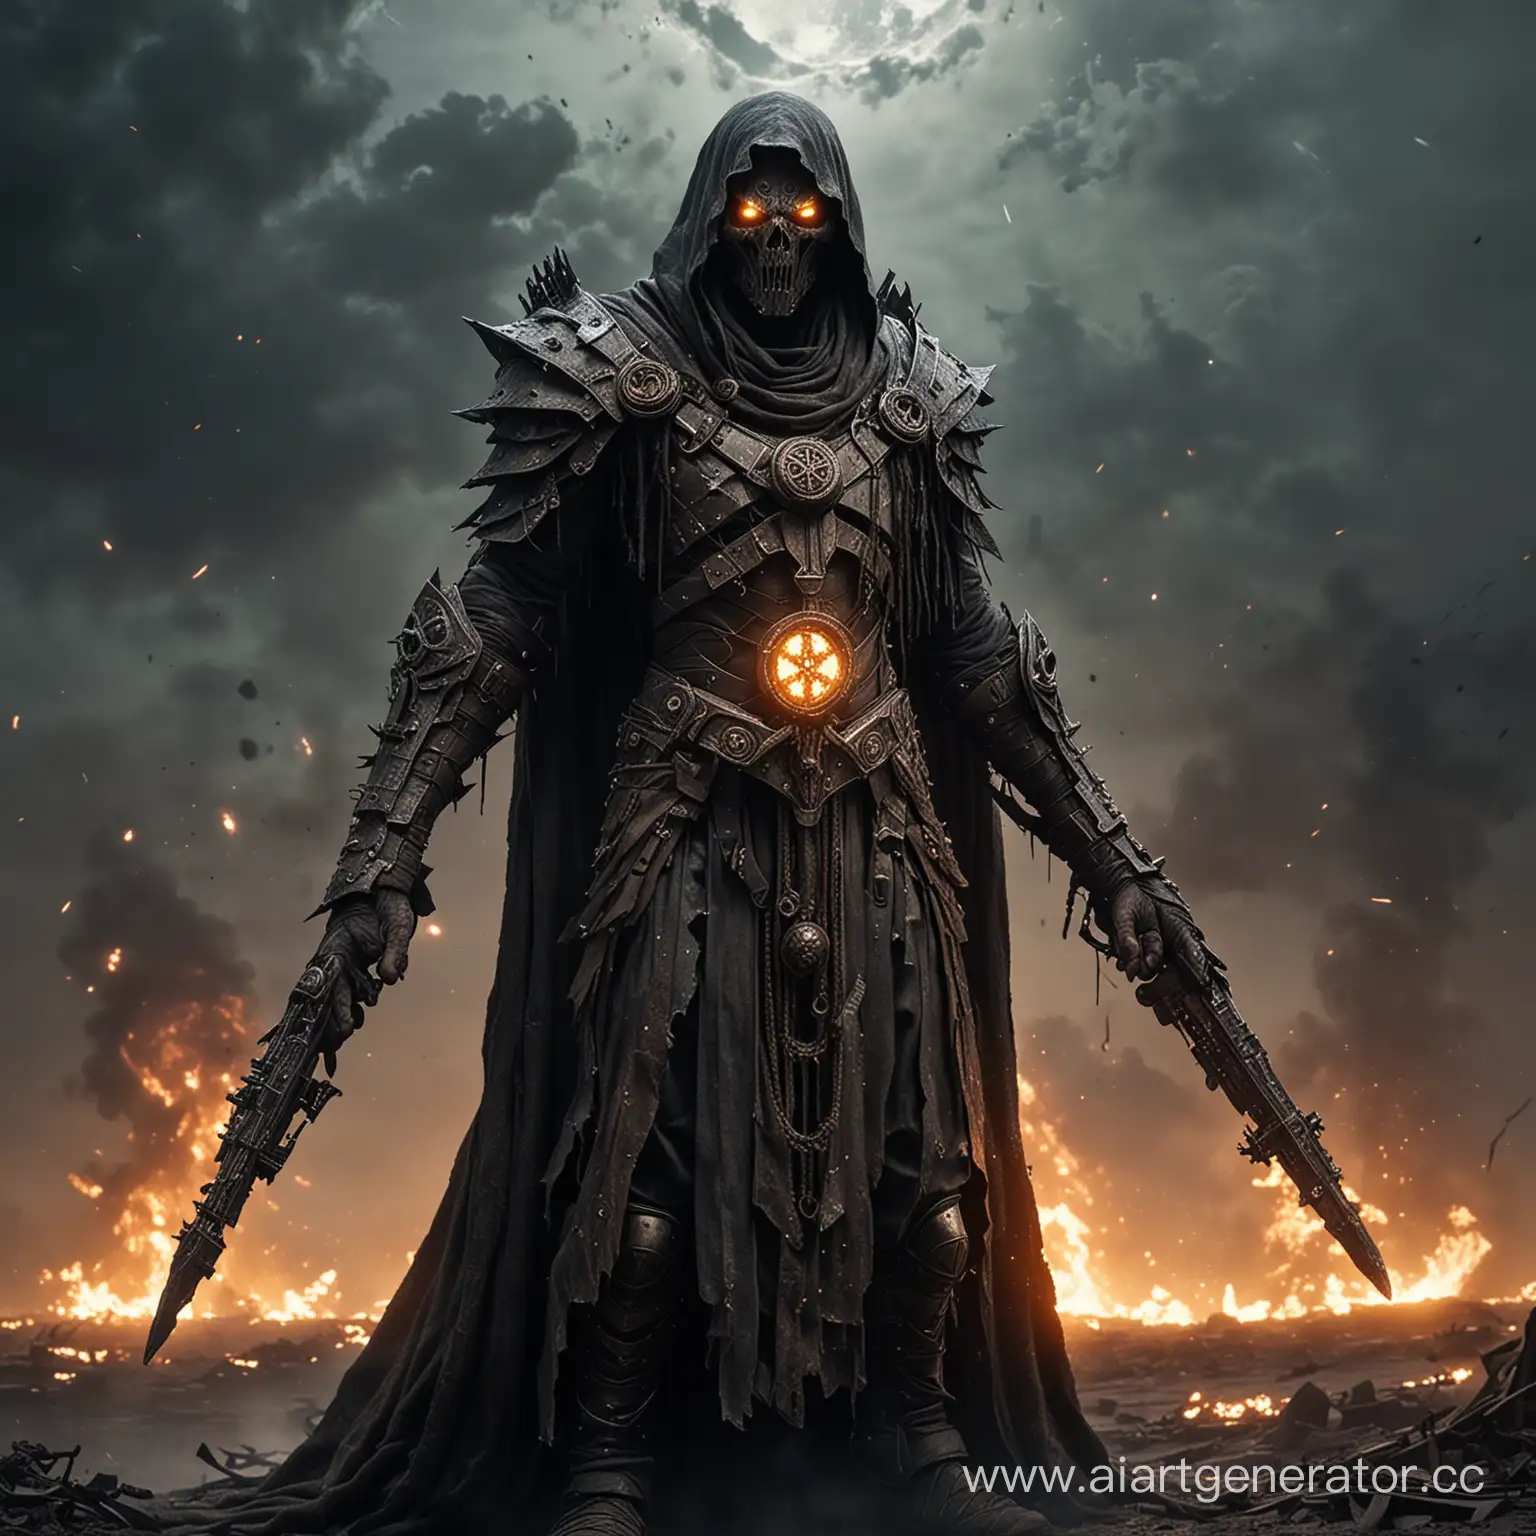 Apocalyptic Arbiter: Bringer of the end times, wearing tattered robes adorned with visions of apocalyptic destruction and glowing doomsday symbols. Make it cinematic 